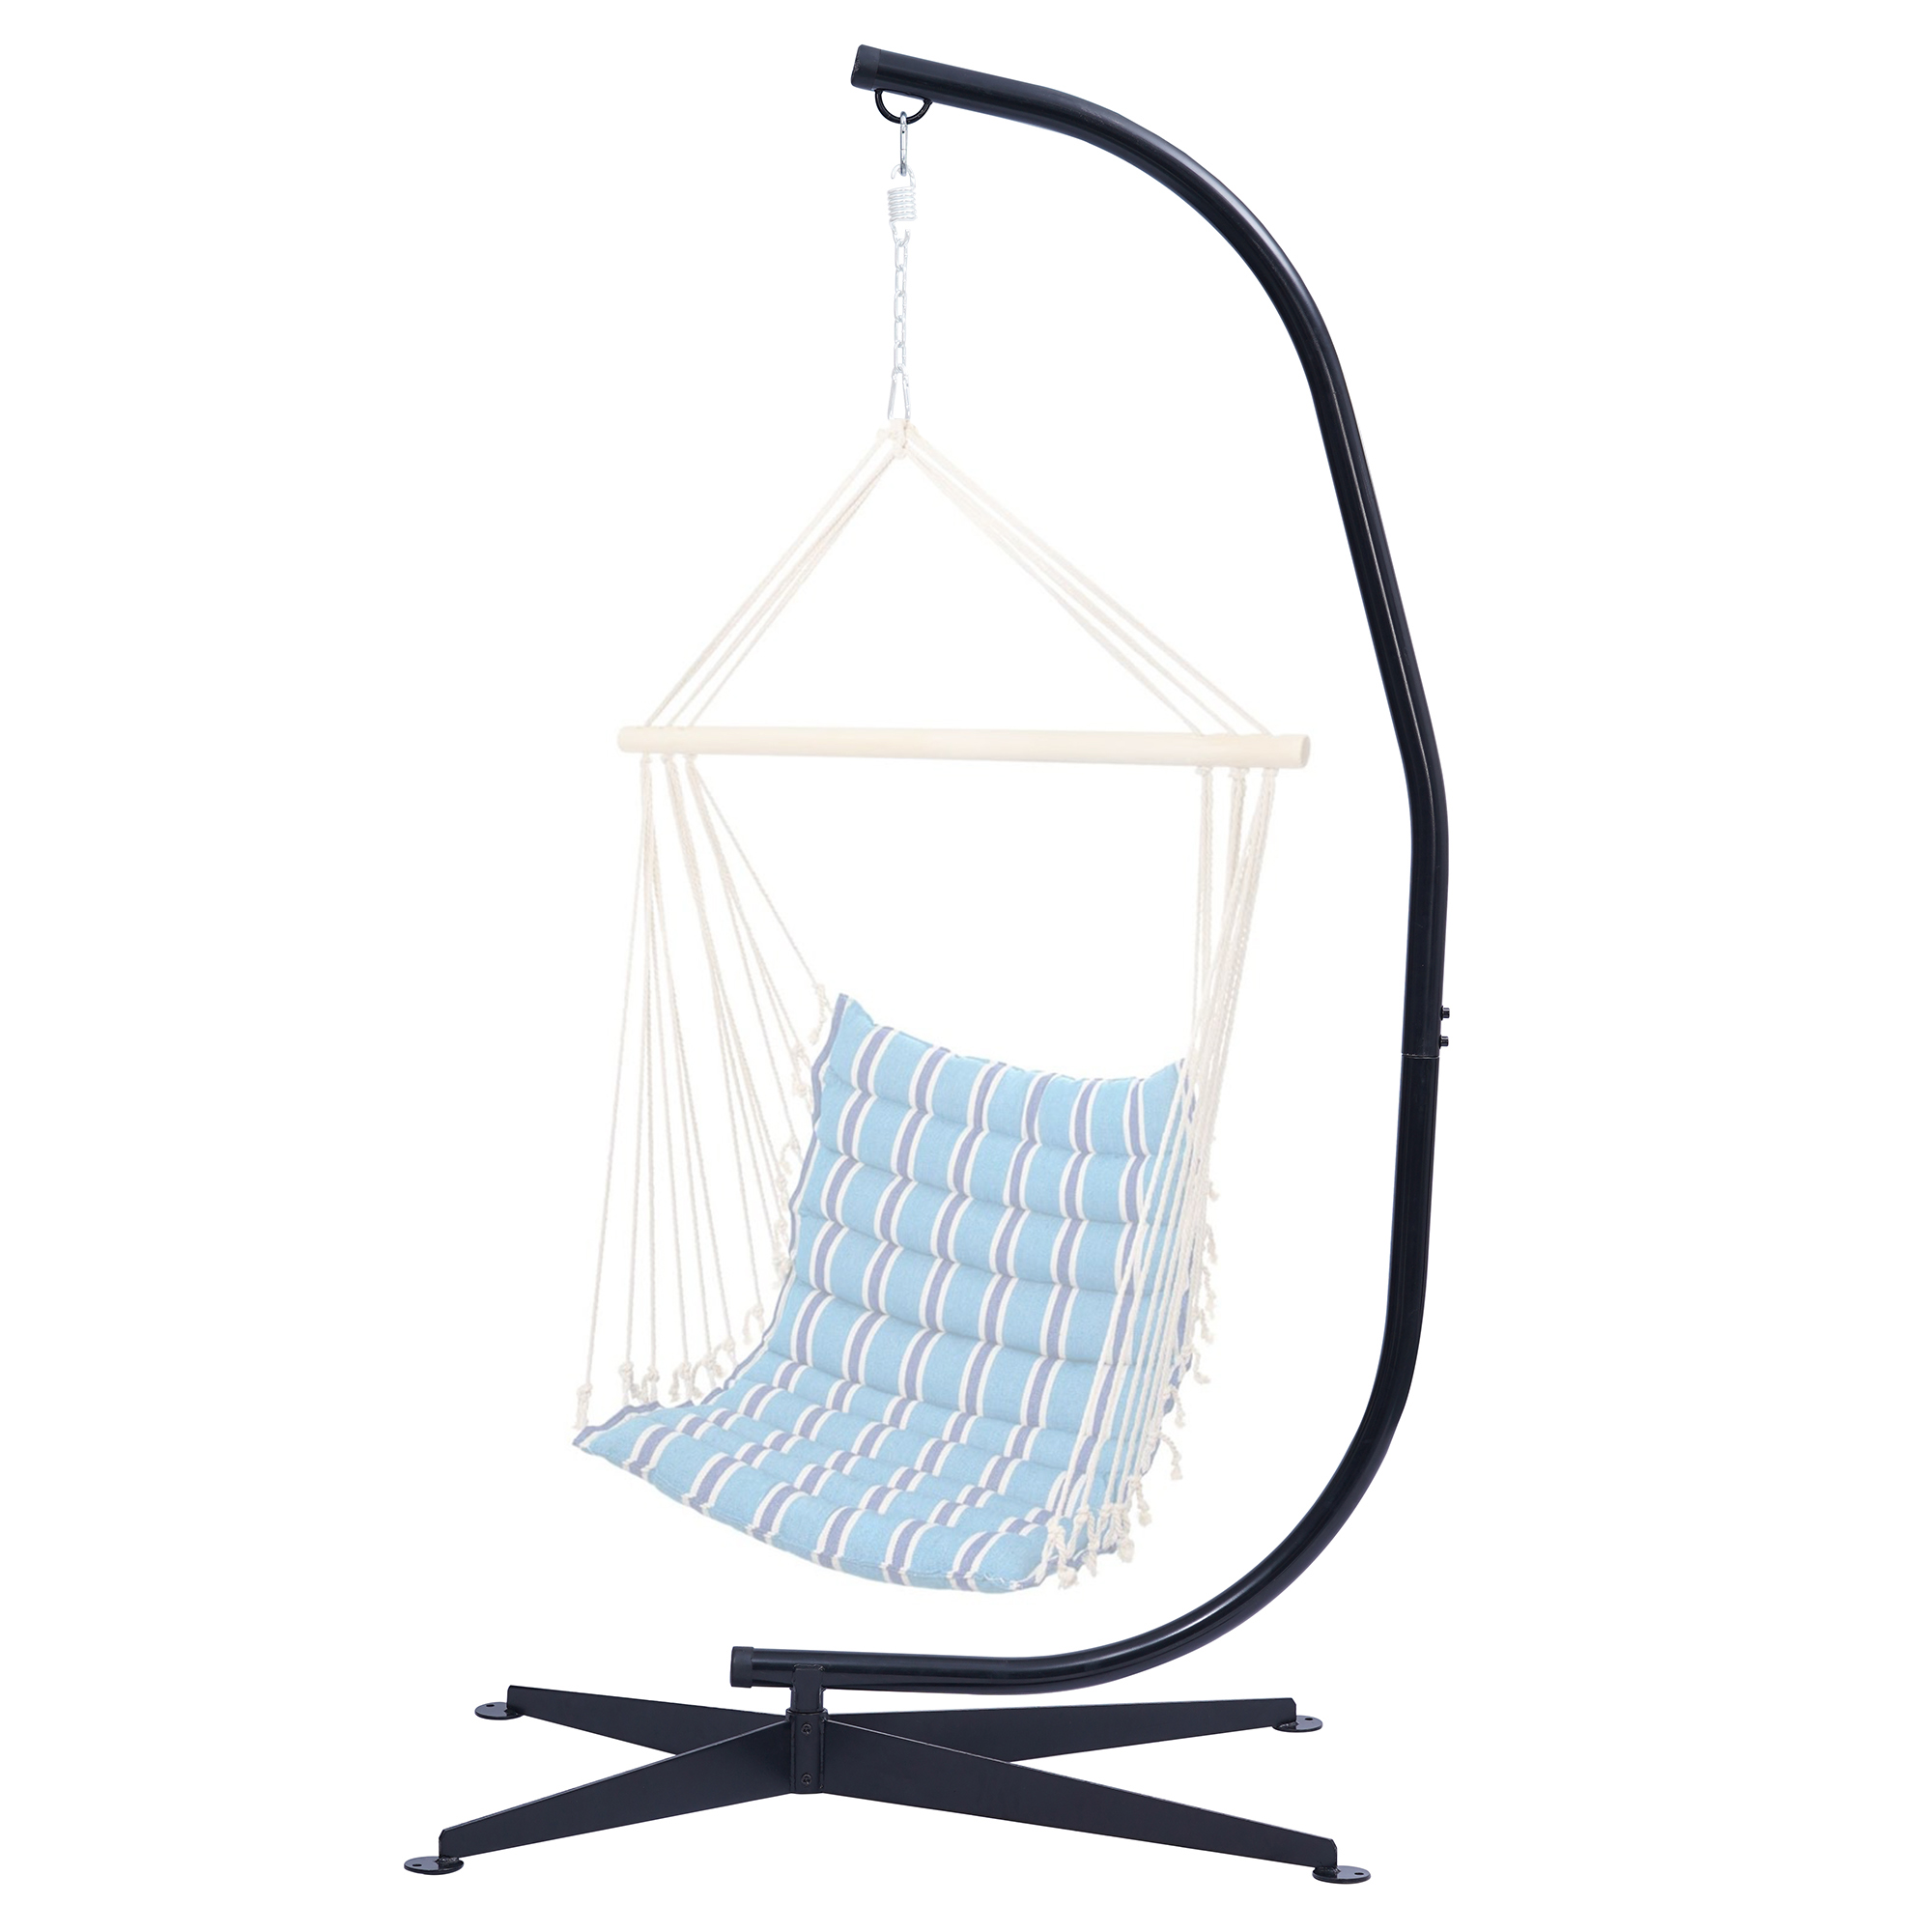 Casainc Hammock Chair Stand Only - Metal C-Stand for Hanging Hammock Chair,Porch Swing - Indoor or Outdoor Use - Durable 300 Pound Capacity,Black-CASAINC